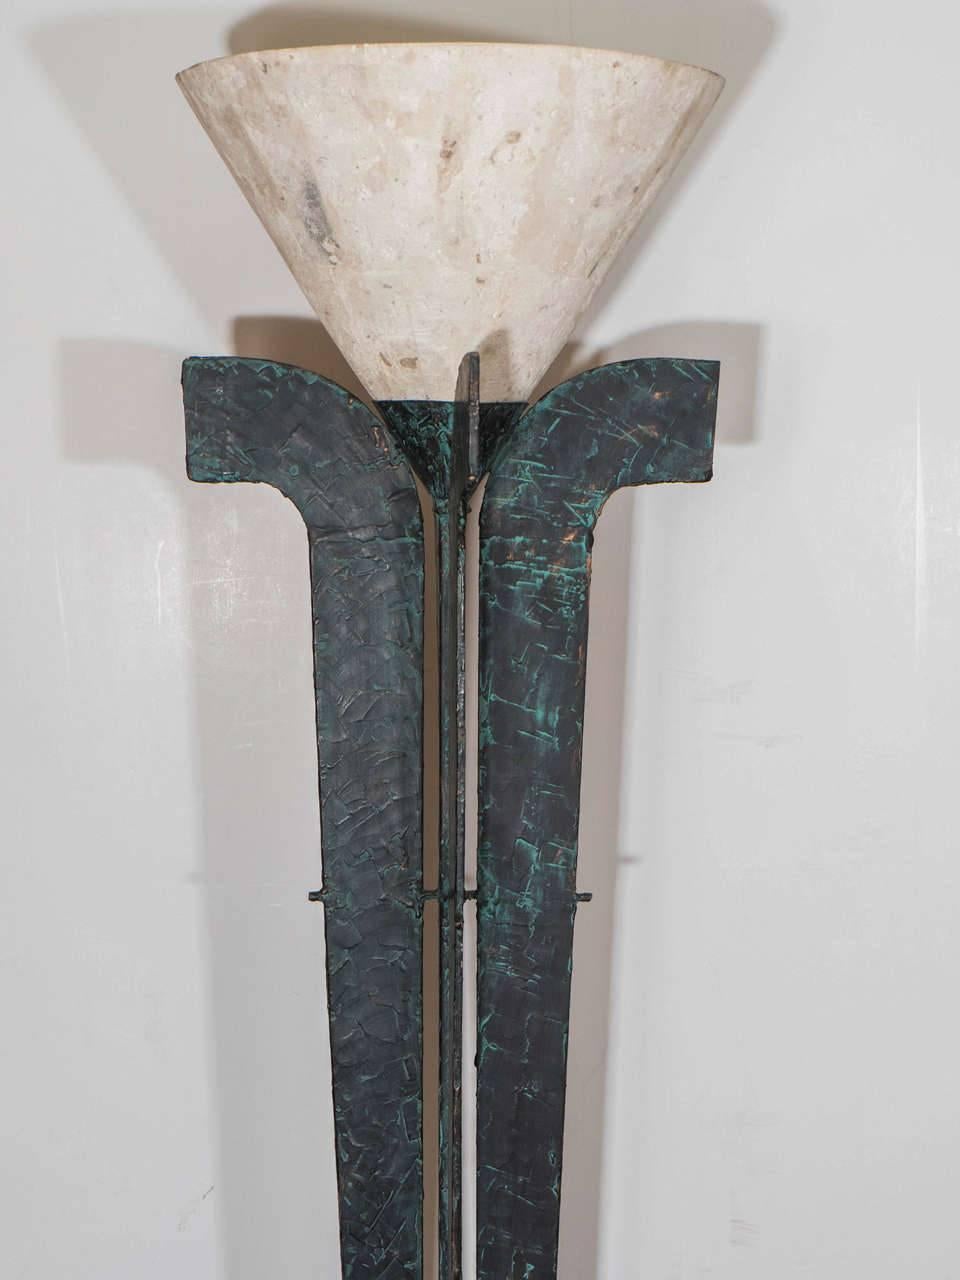 An amazing French Art Deco style torchiere or floor lamp in patinated bronze with a stone shade, circa 1970.